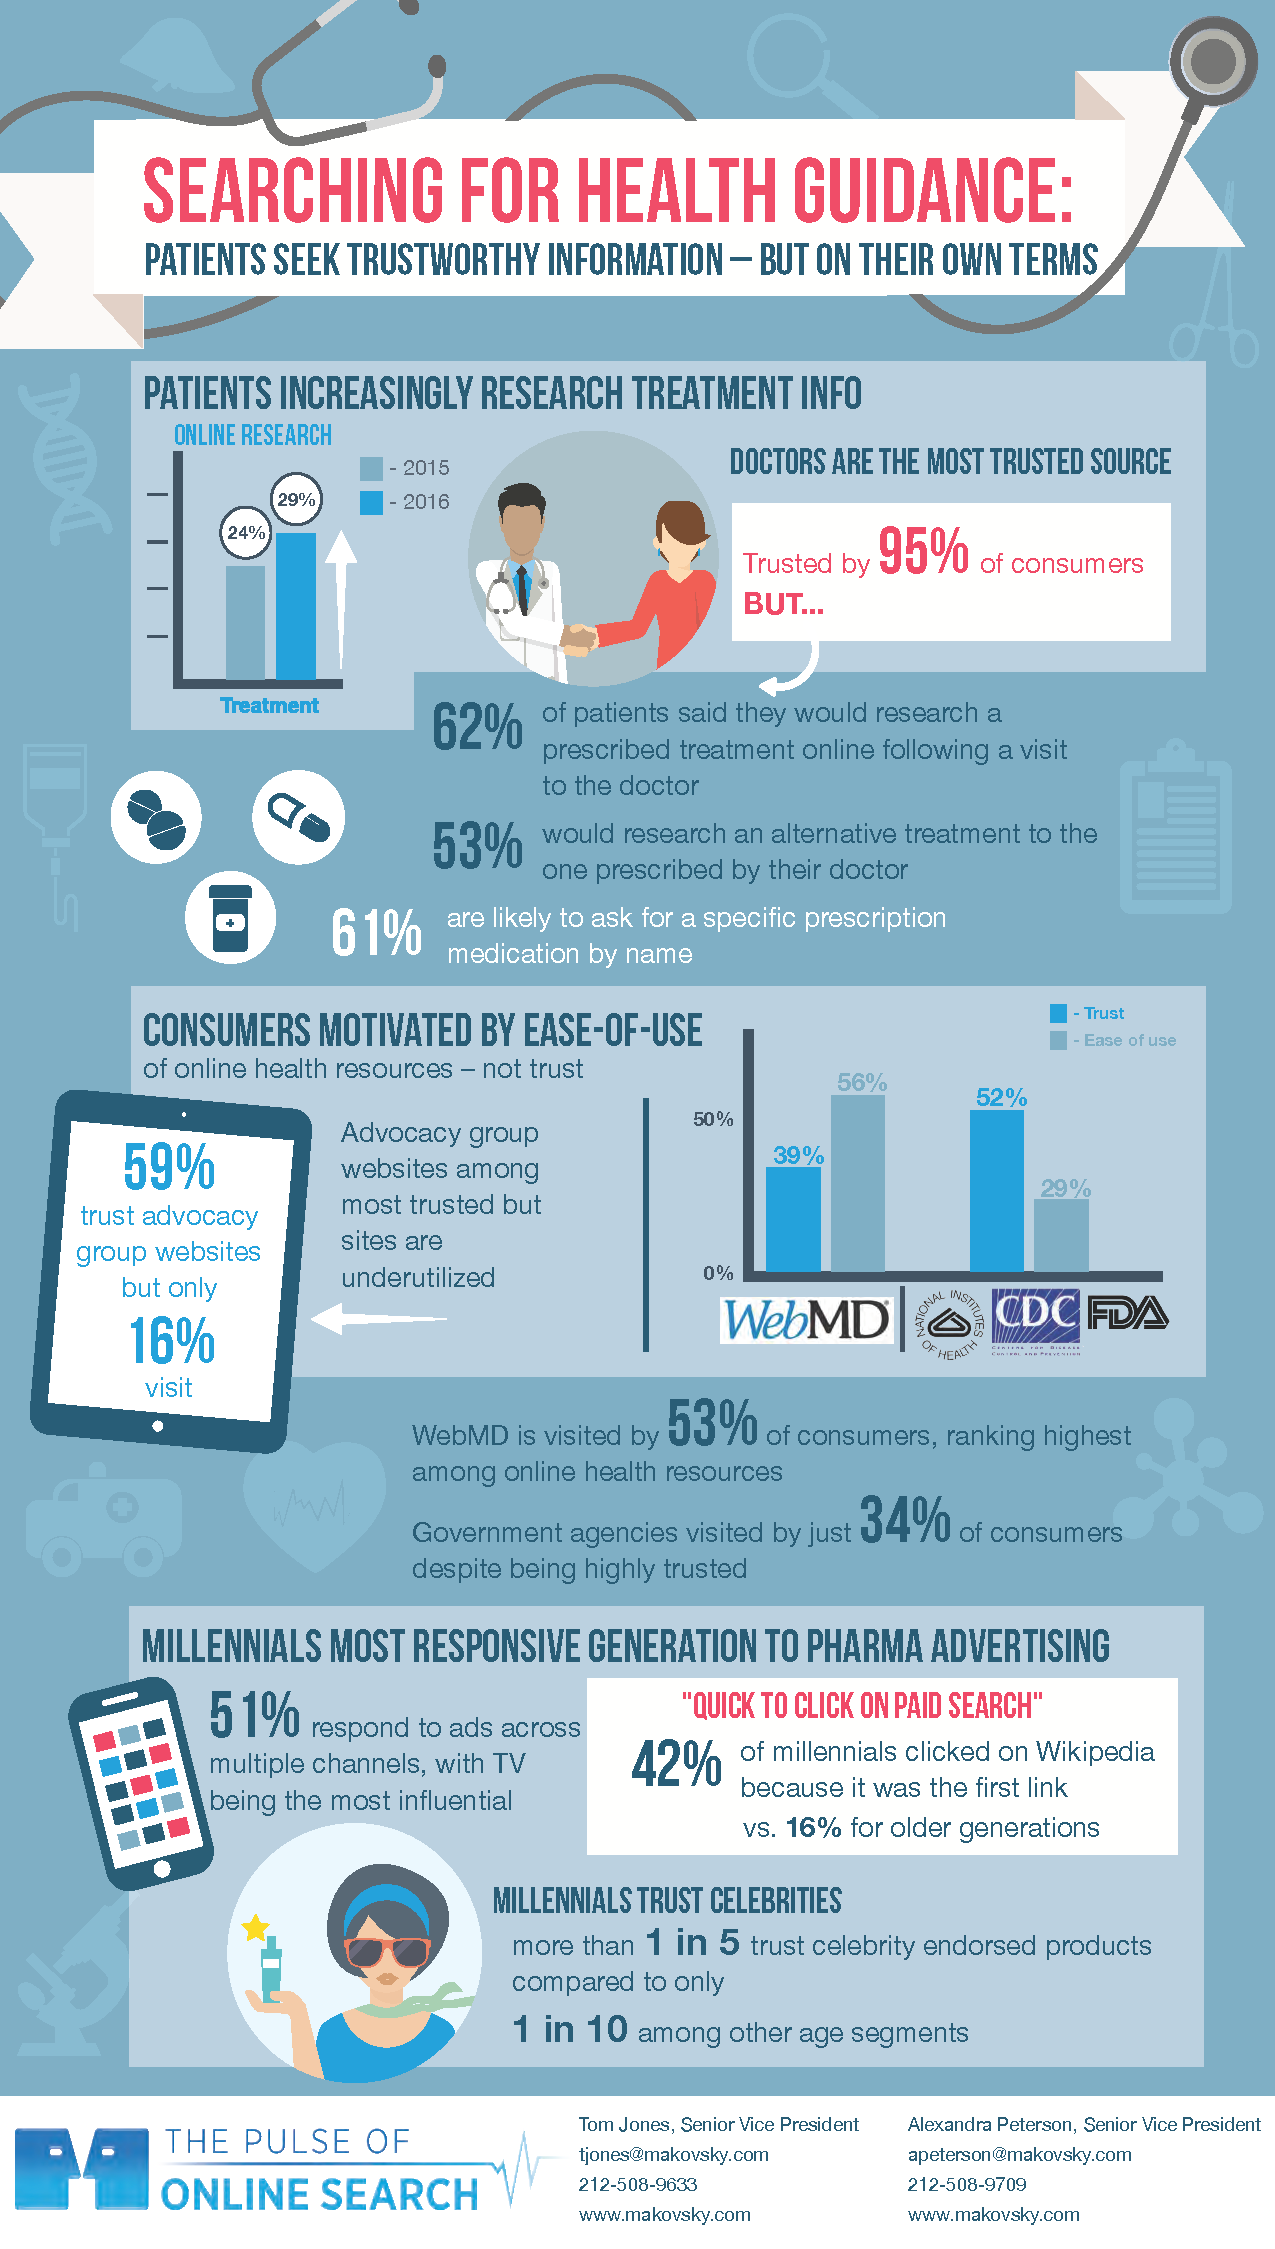 Makovsky Health - Searching for Health Guidance Infographic